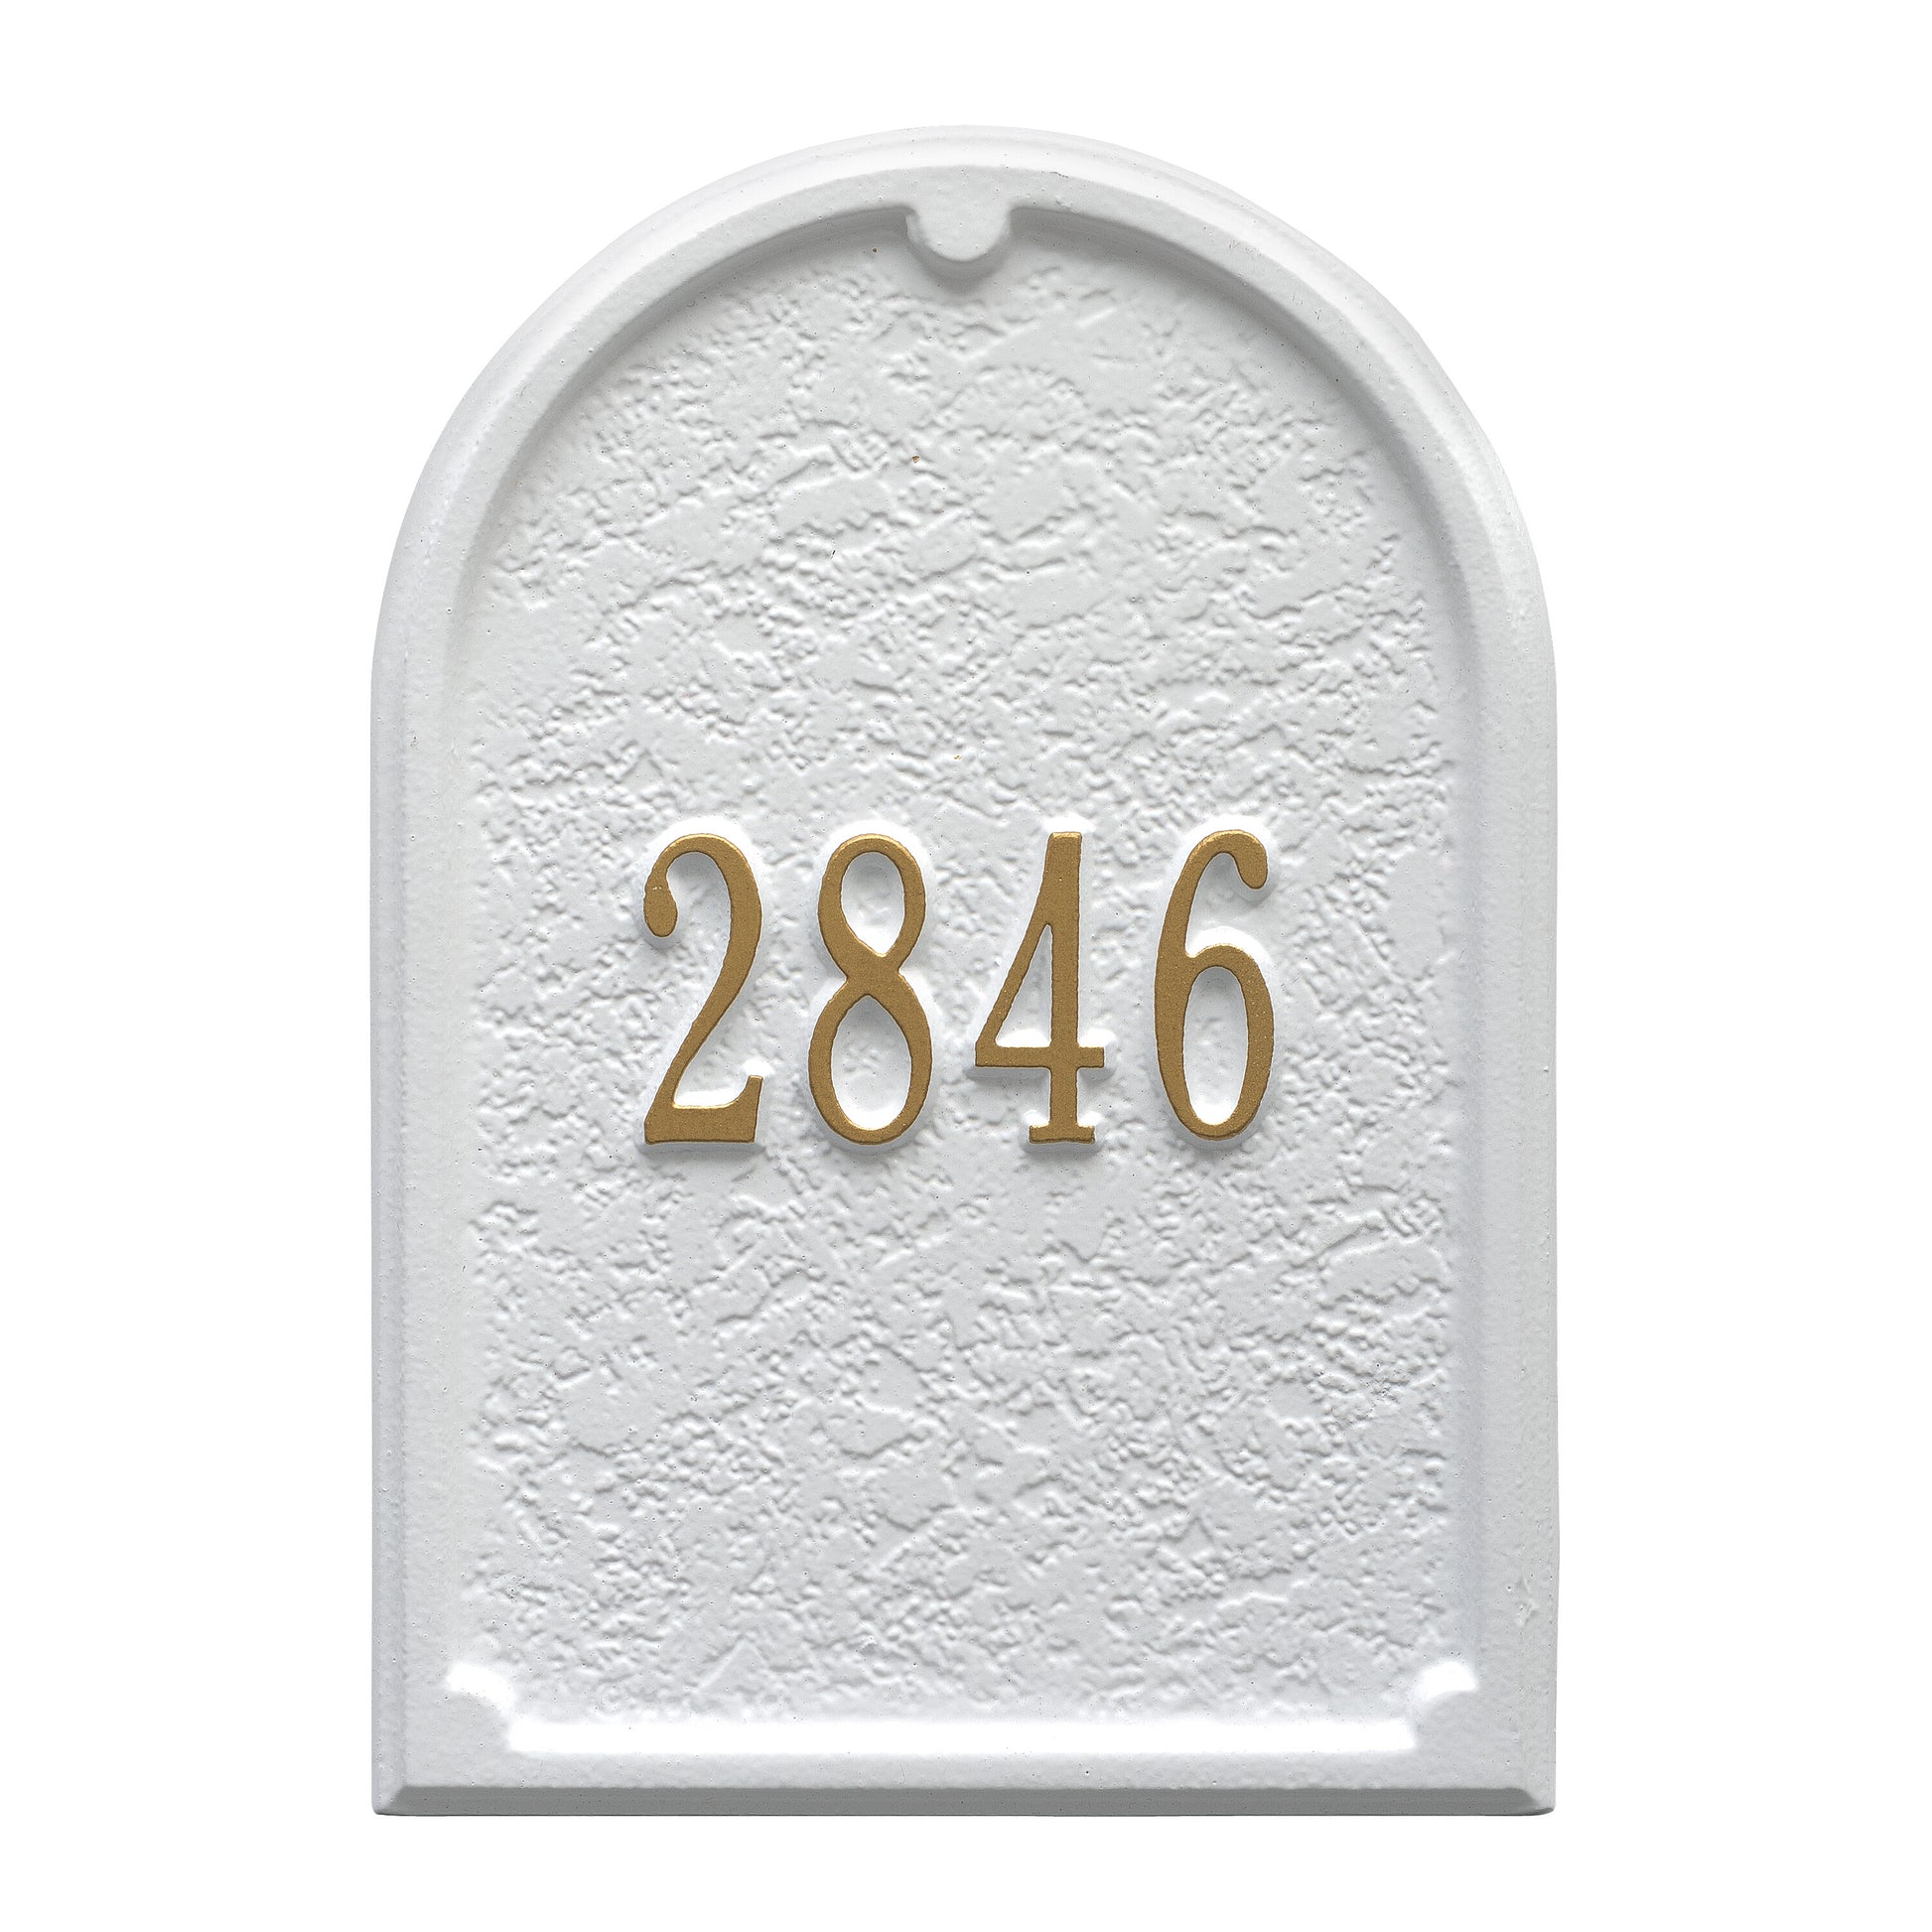 Whitehall Products Personalized Mailbox Door Personalized Door Plaque Black/gold